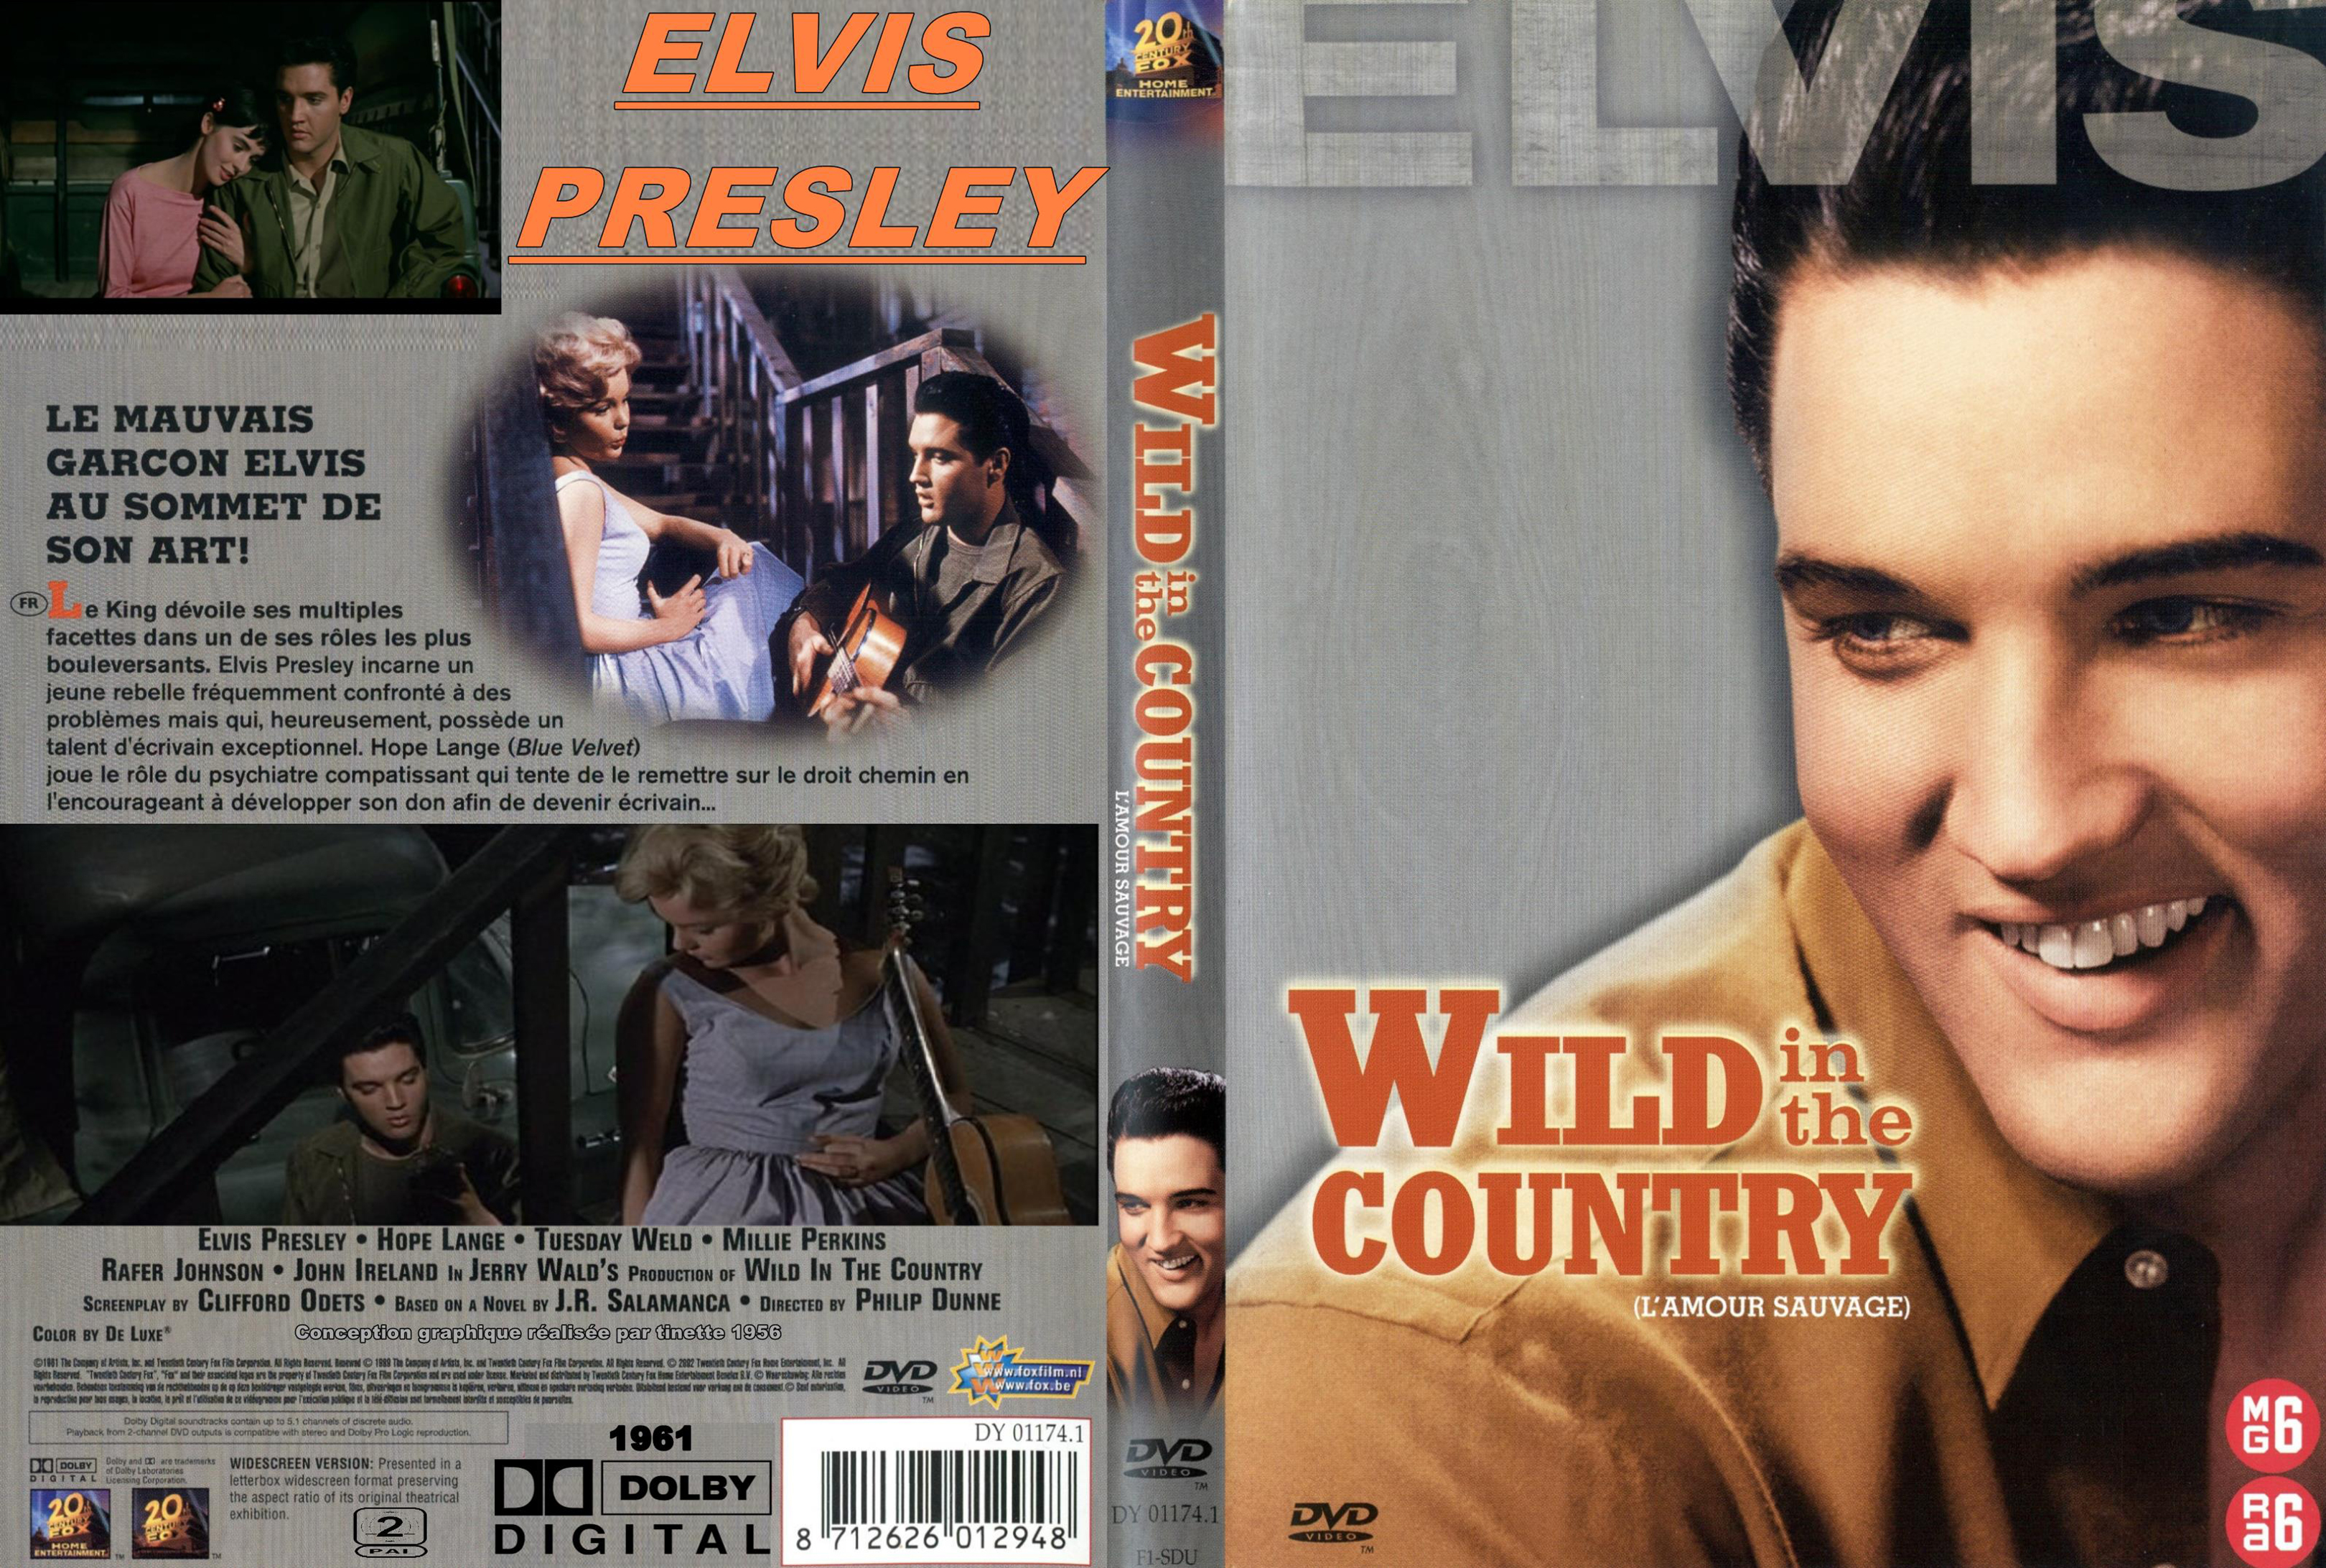 Jaquette DVD Wild in the country custom